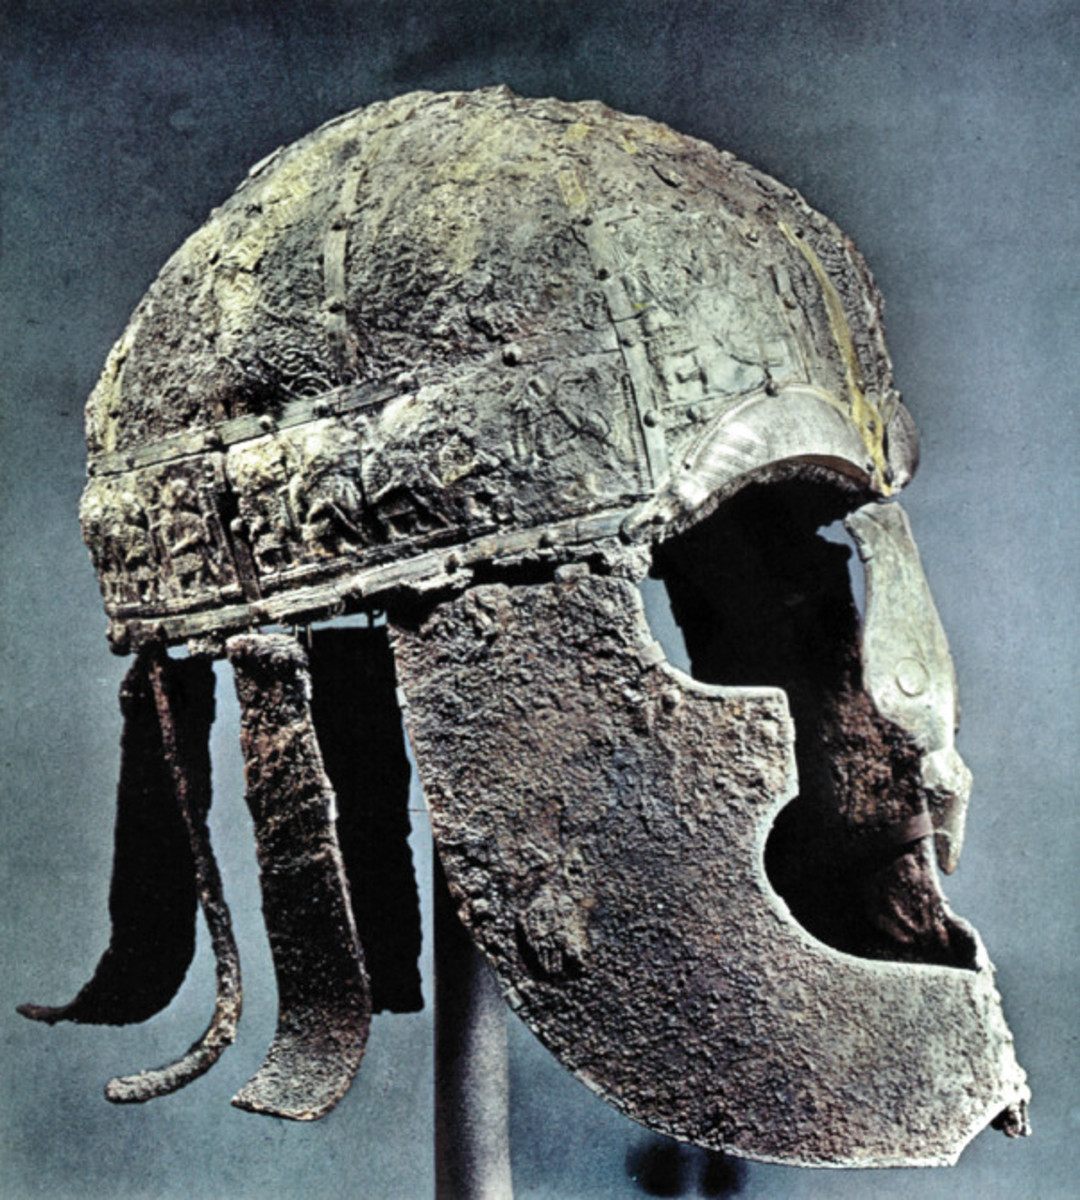 Vendel helm found near Uppsala, Sweden. Armour fit for a king